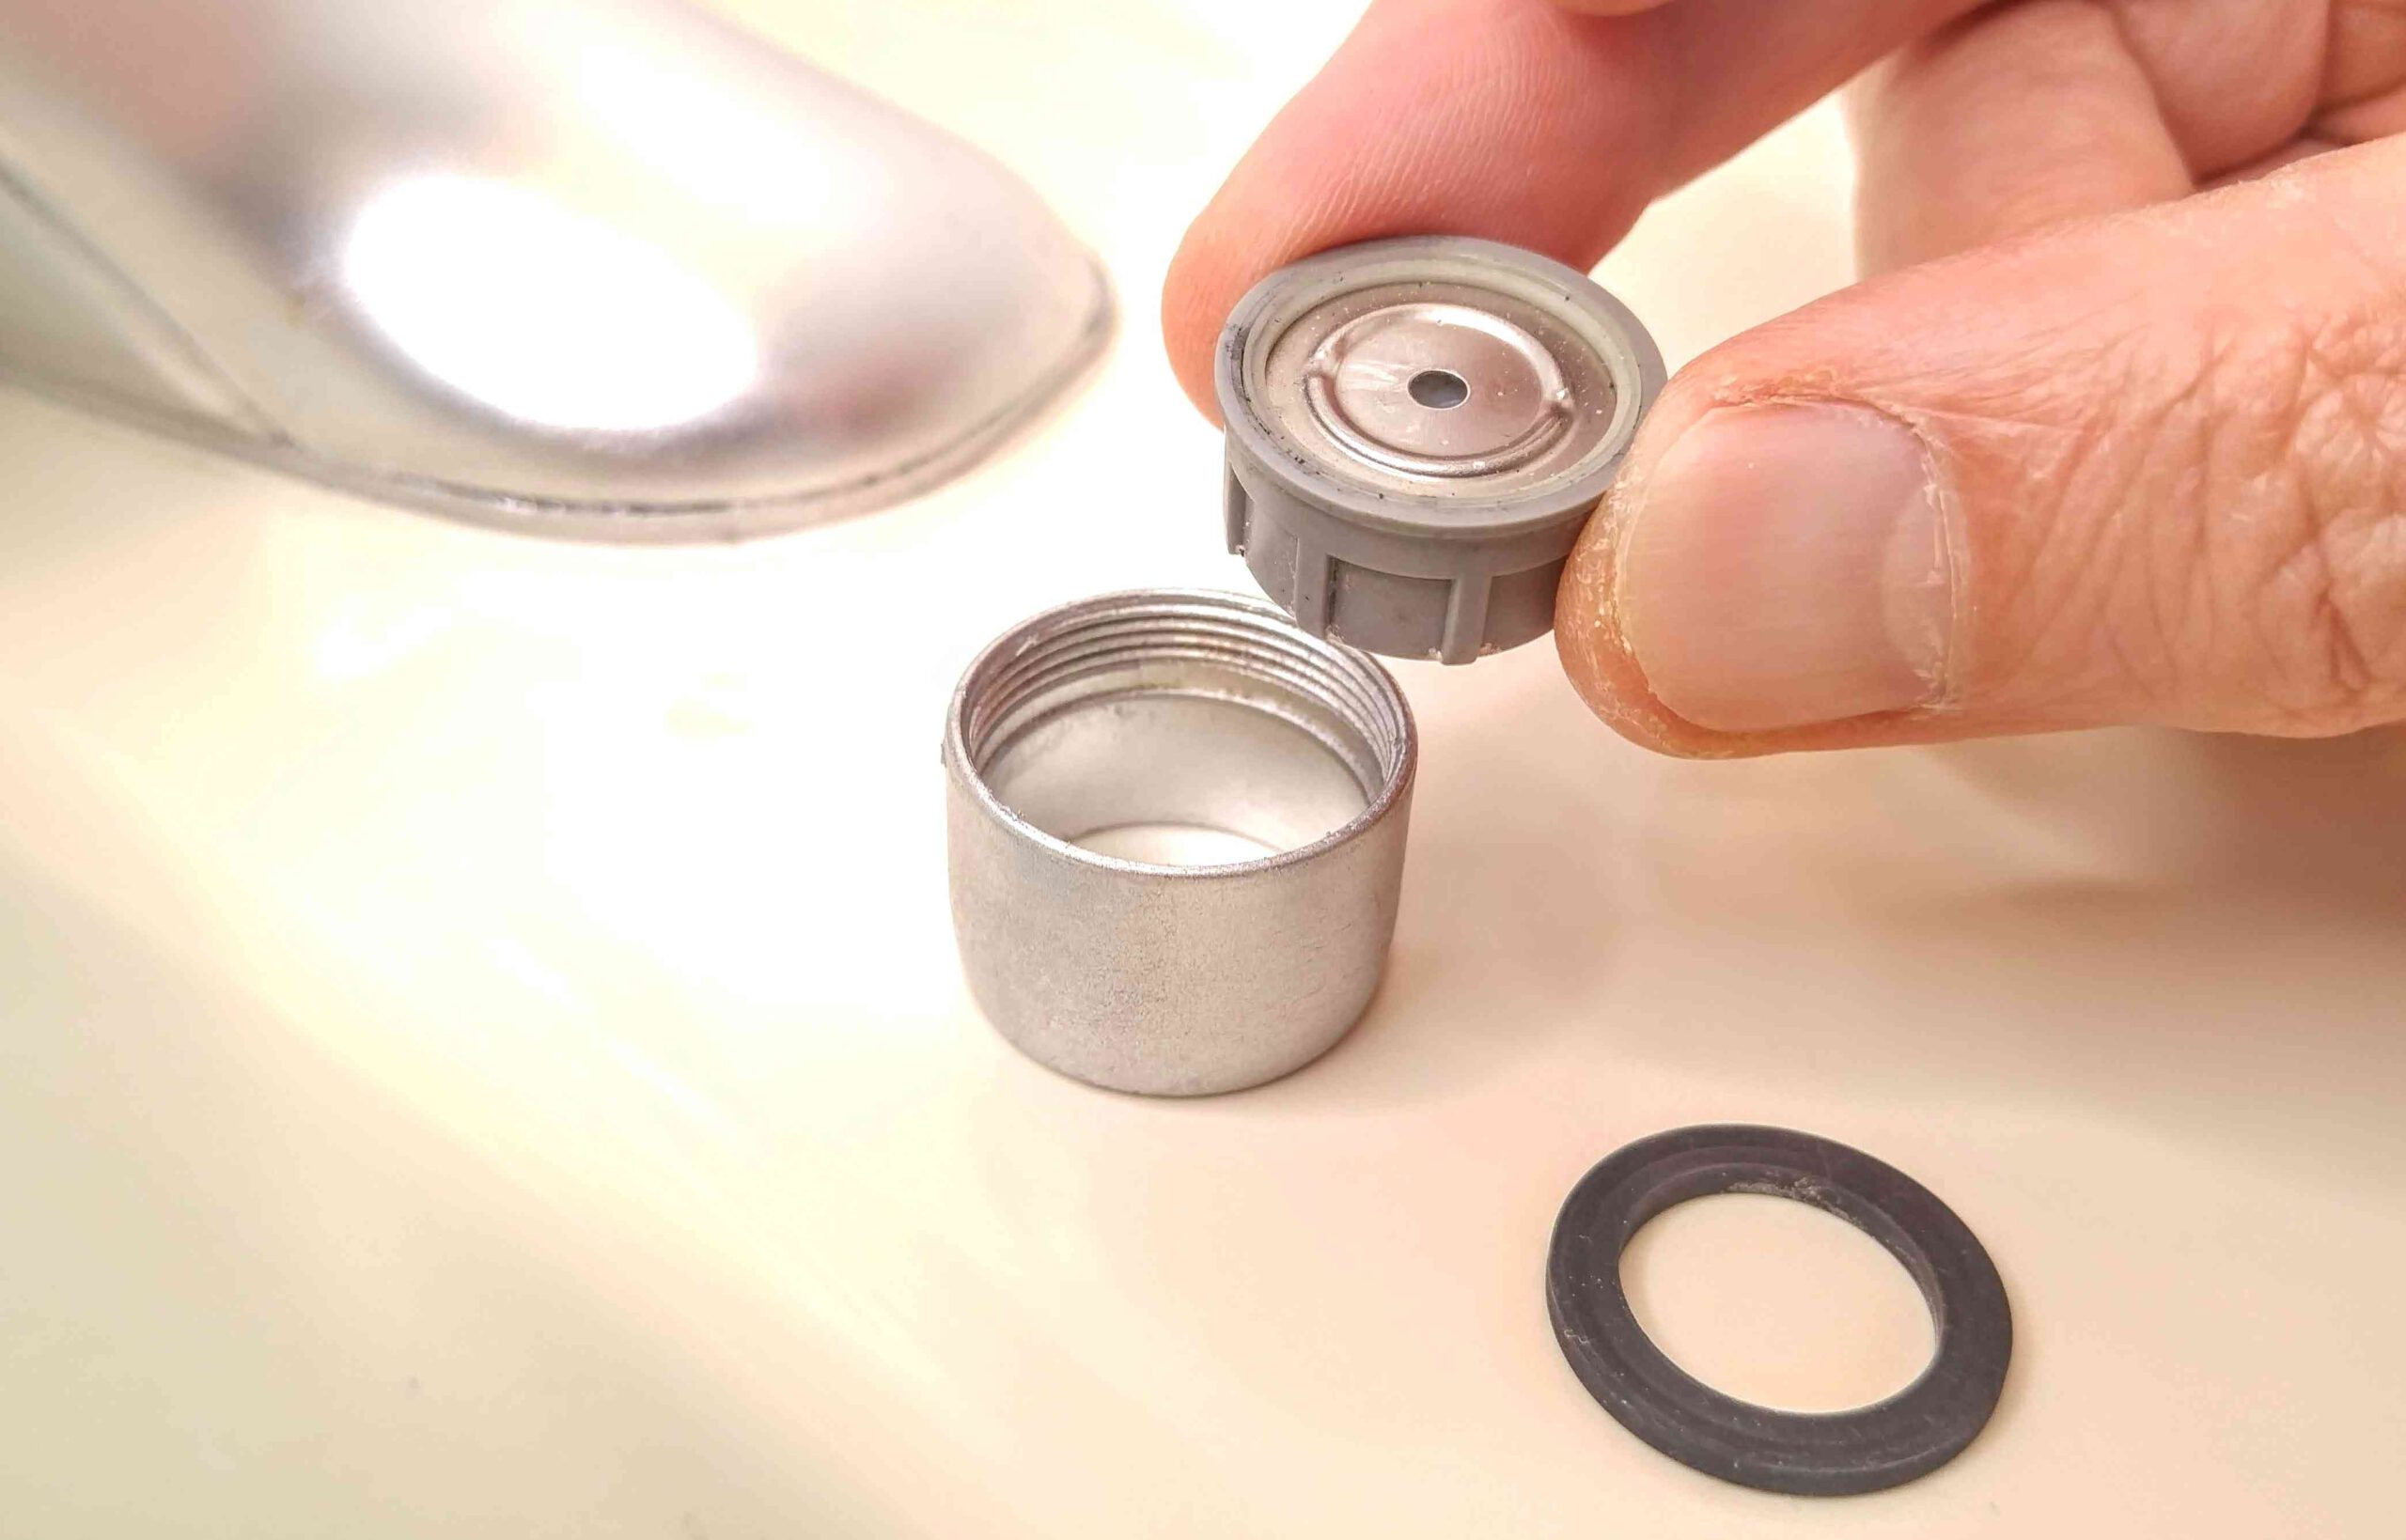 Install the New Faucet Aerator 